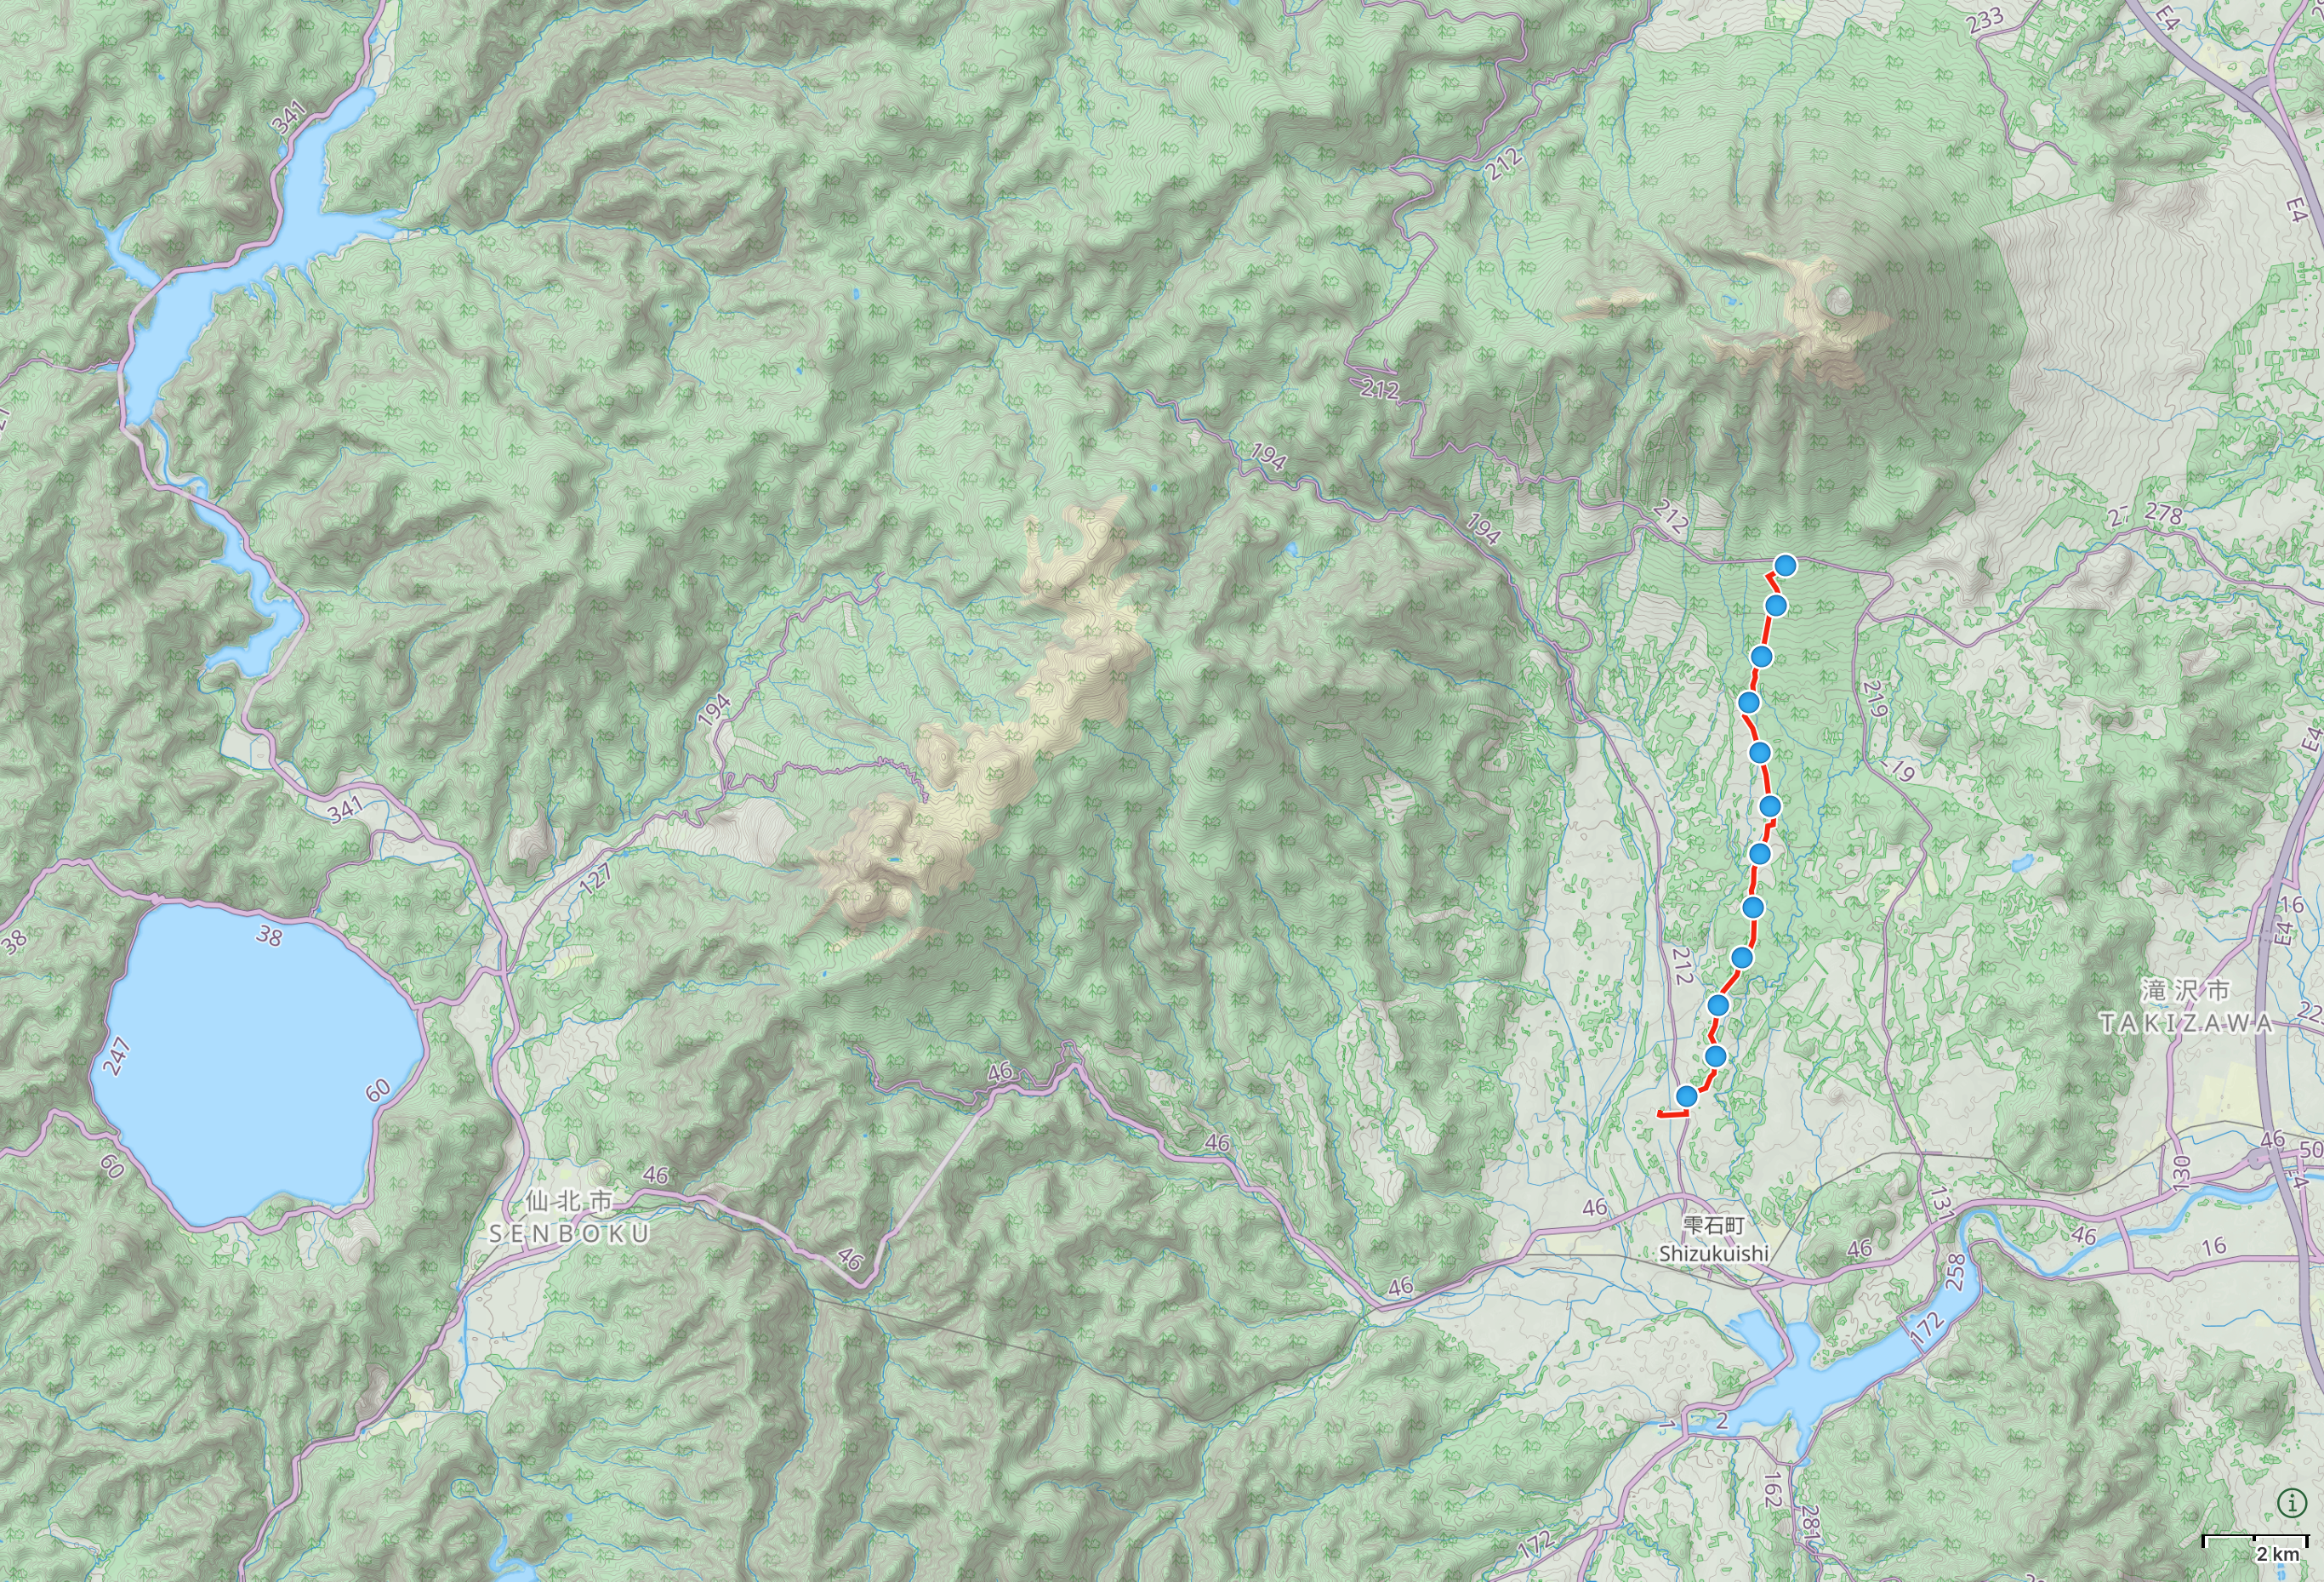 Map of Iwate prefecture with author’s route from Shizukuishi to Omisaka Trailhead highlighted.